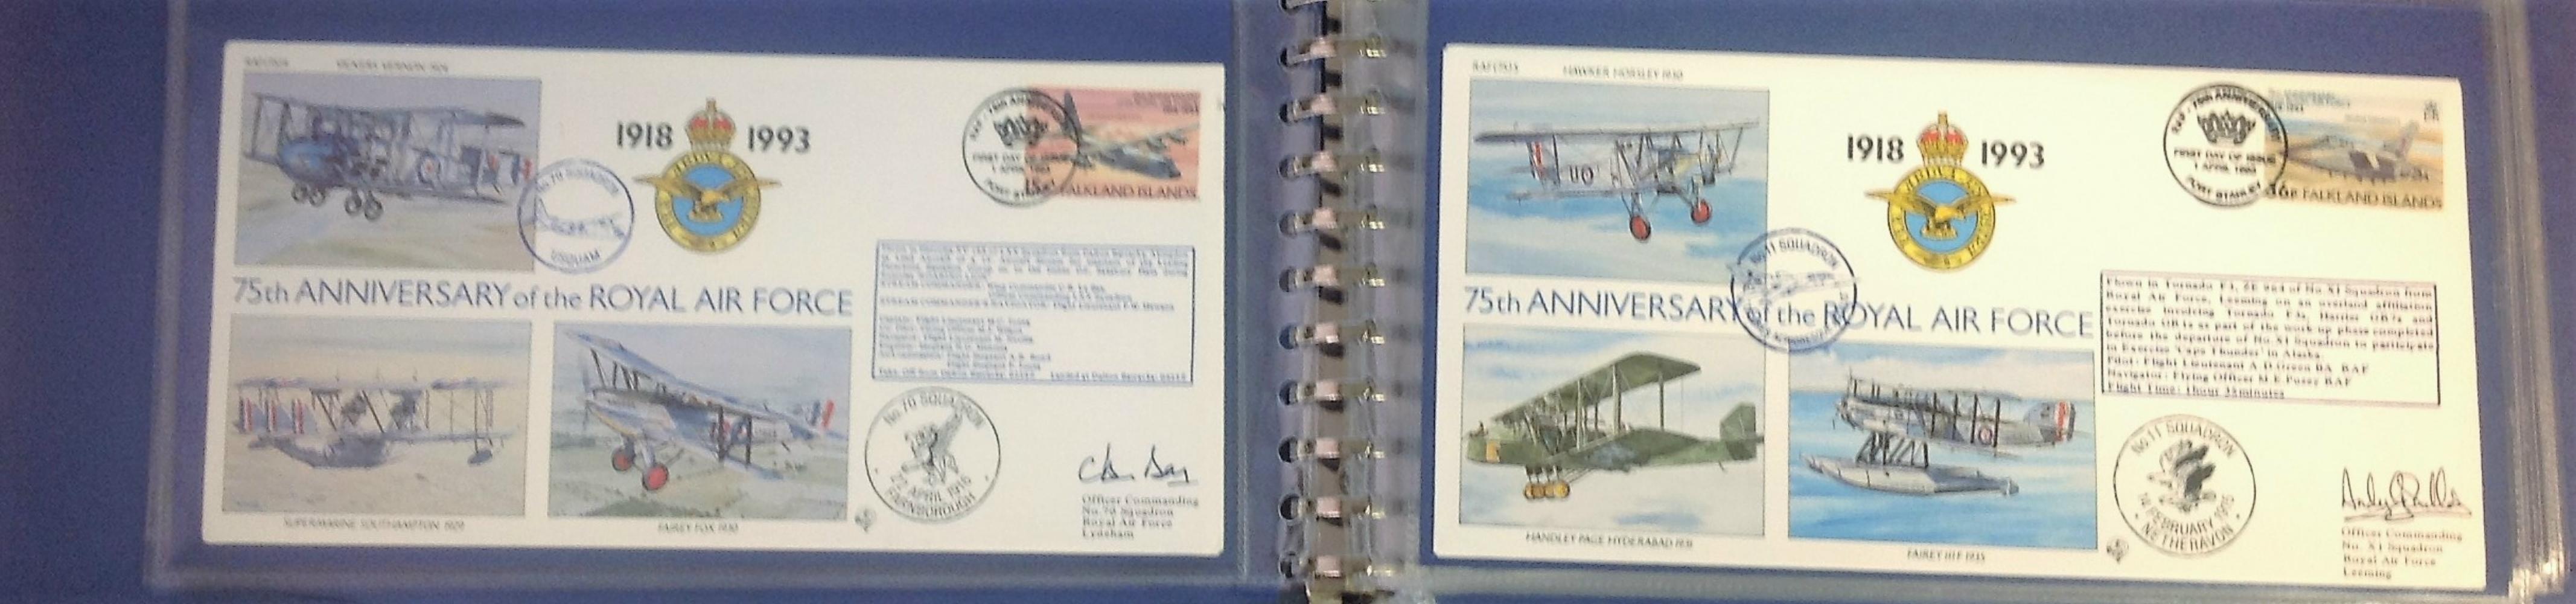 75th Ann RAF pilot signed collection. Complete set of the 30 covers in Blue Logoed RAF Album. Covers - Image 4 of 8